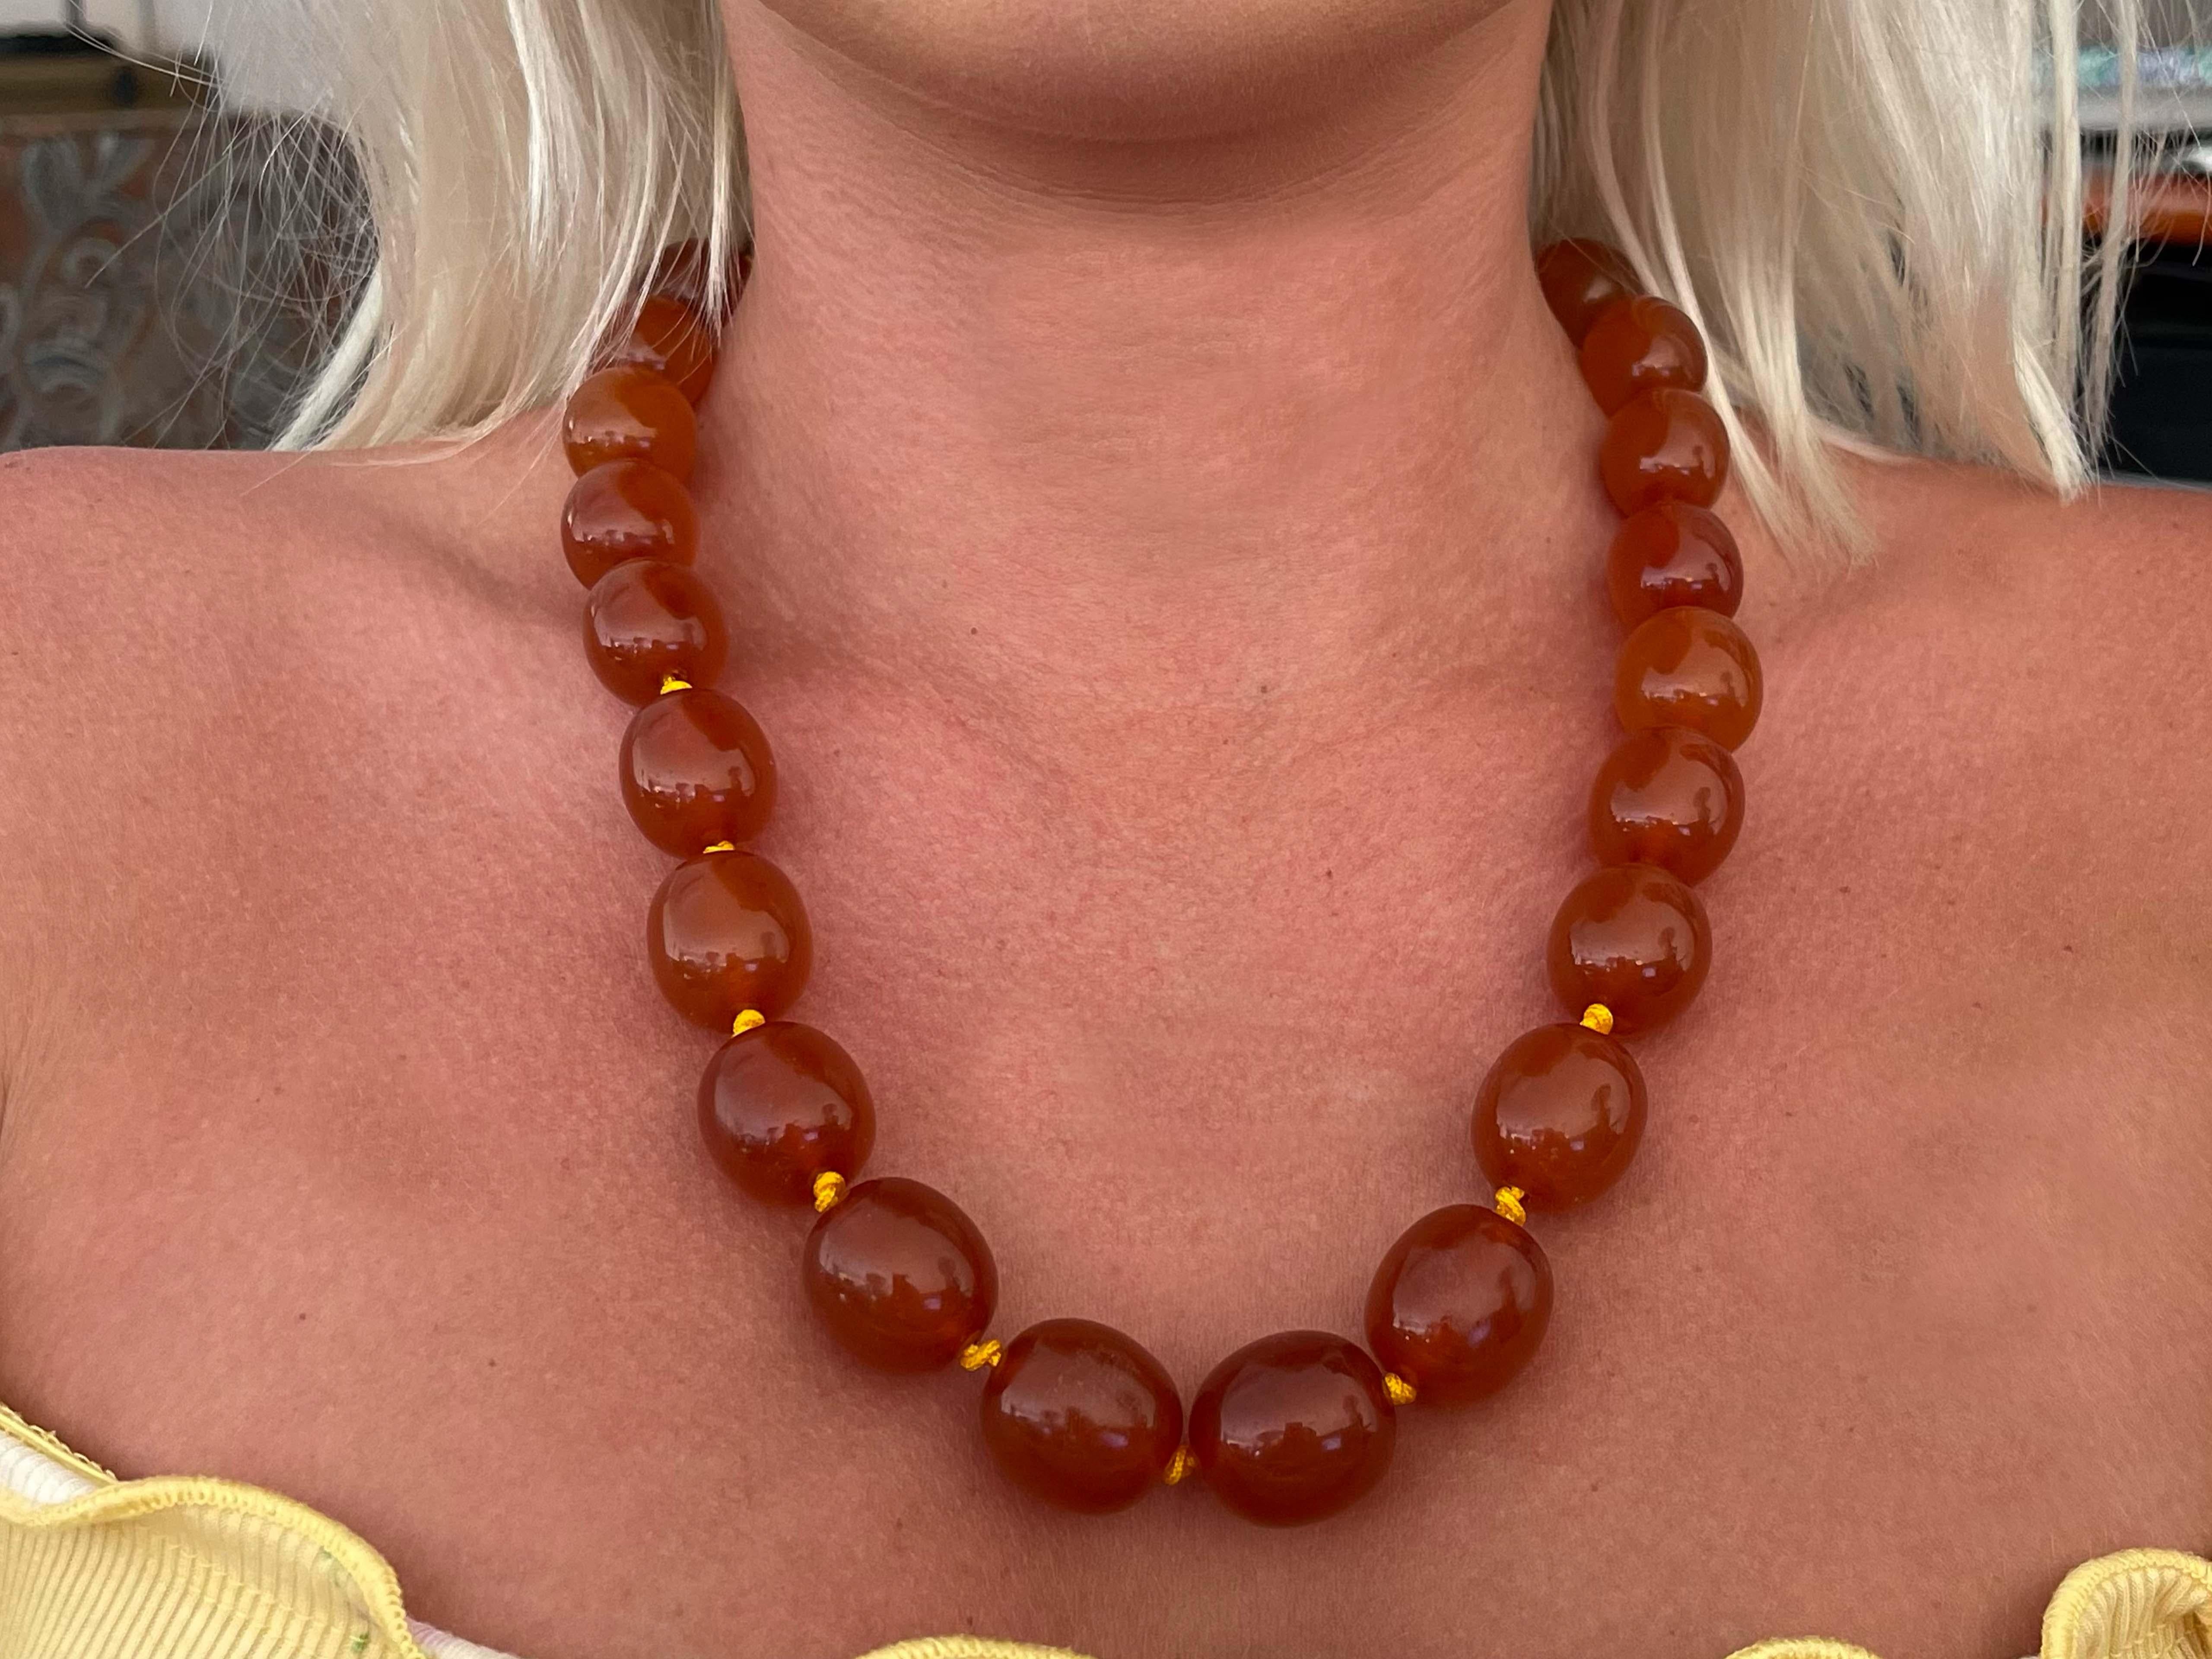 Specifications:

Designer: Ming's

Metal: 14k Yellow Gold

Gemstones: Amber

Total Weight: 94.8 Grams

Necklace Length: 23